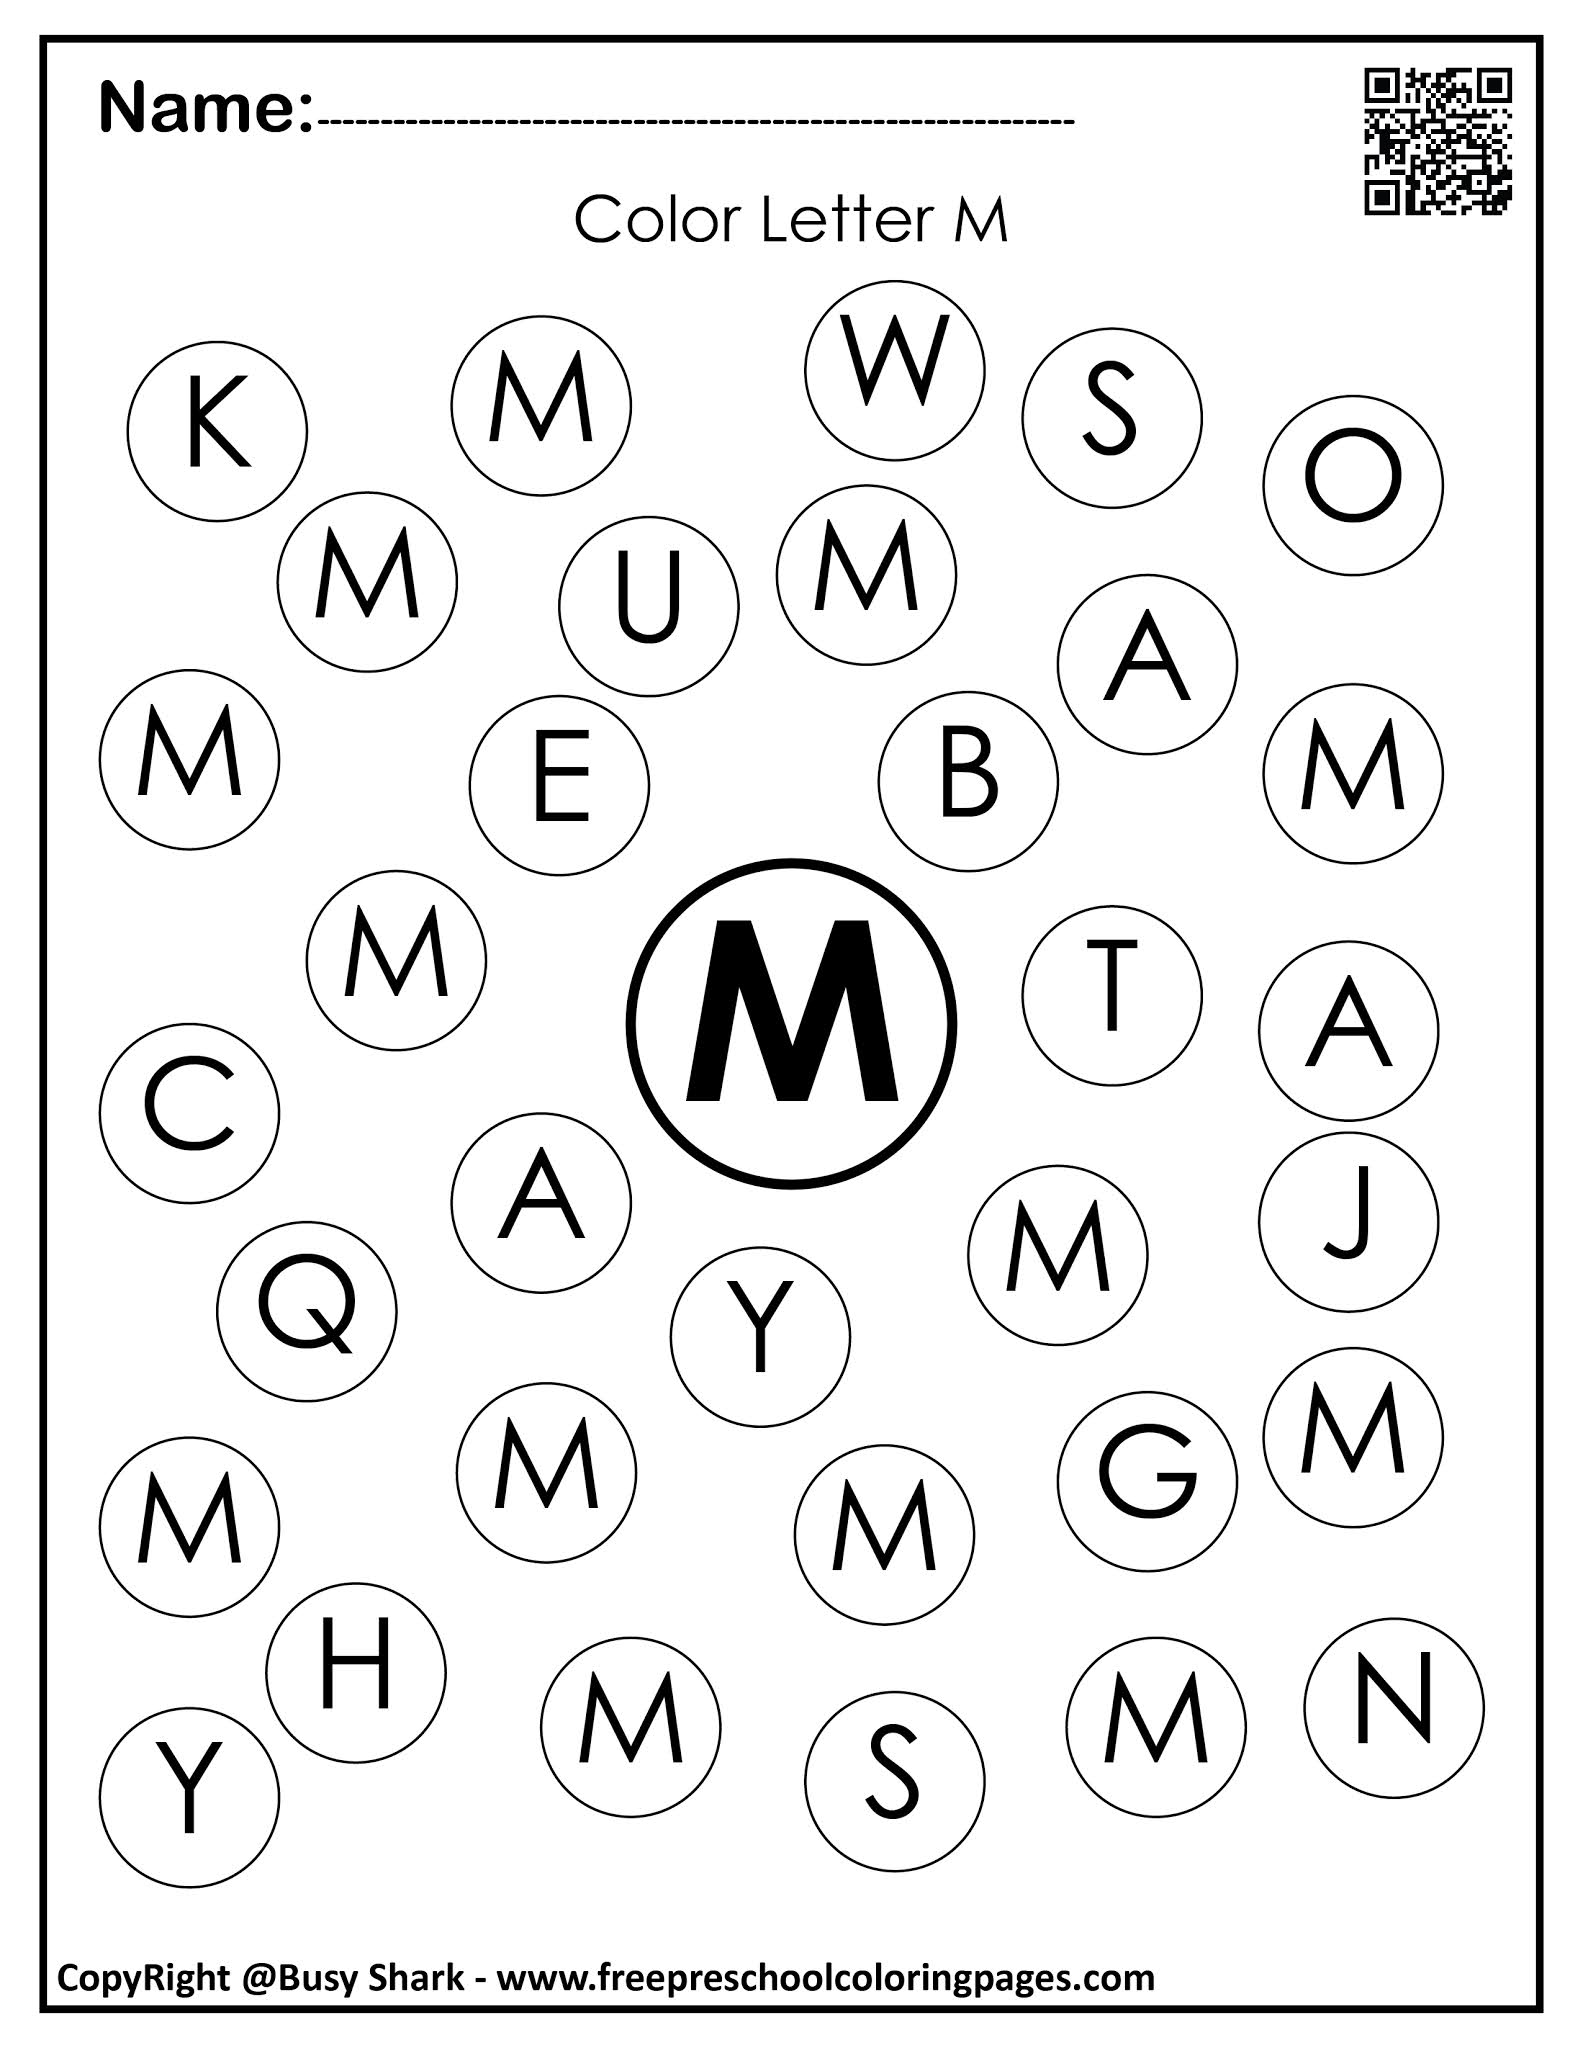 letter-m-colouring-pages-vercooking